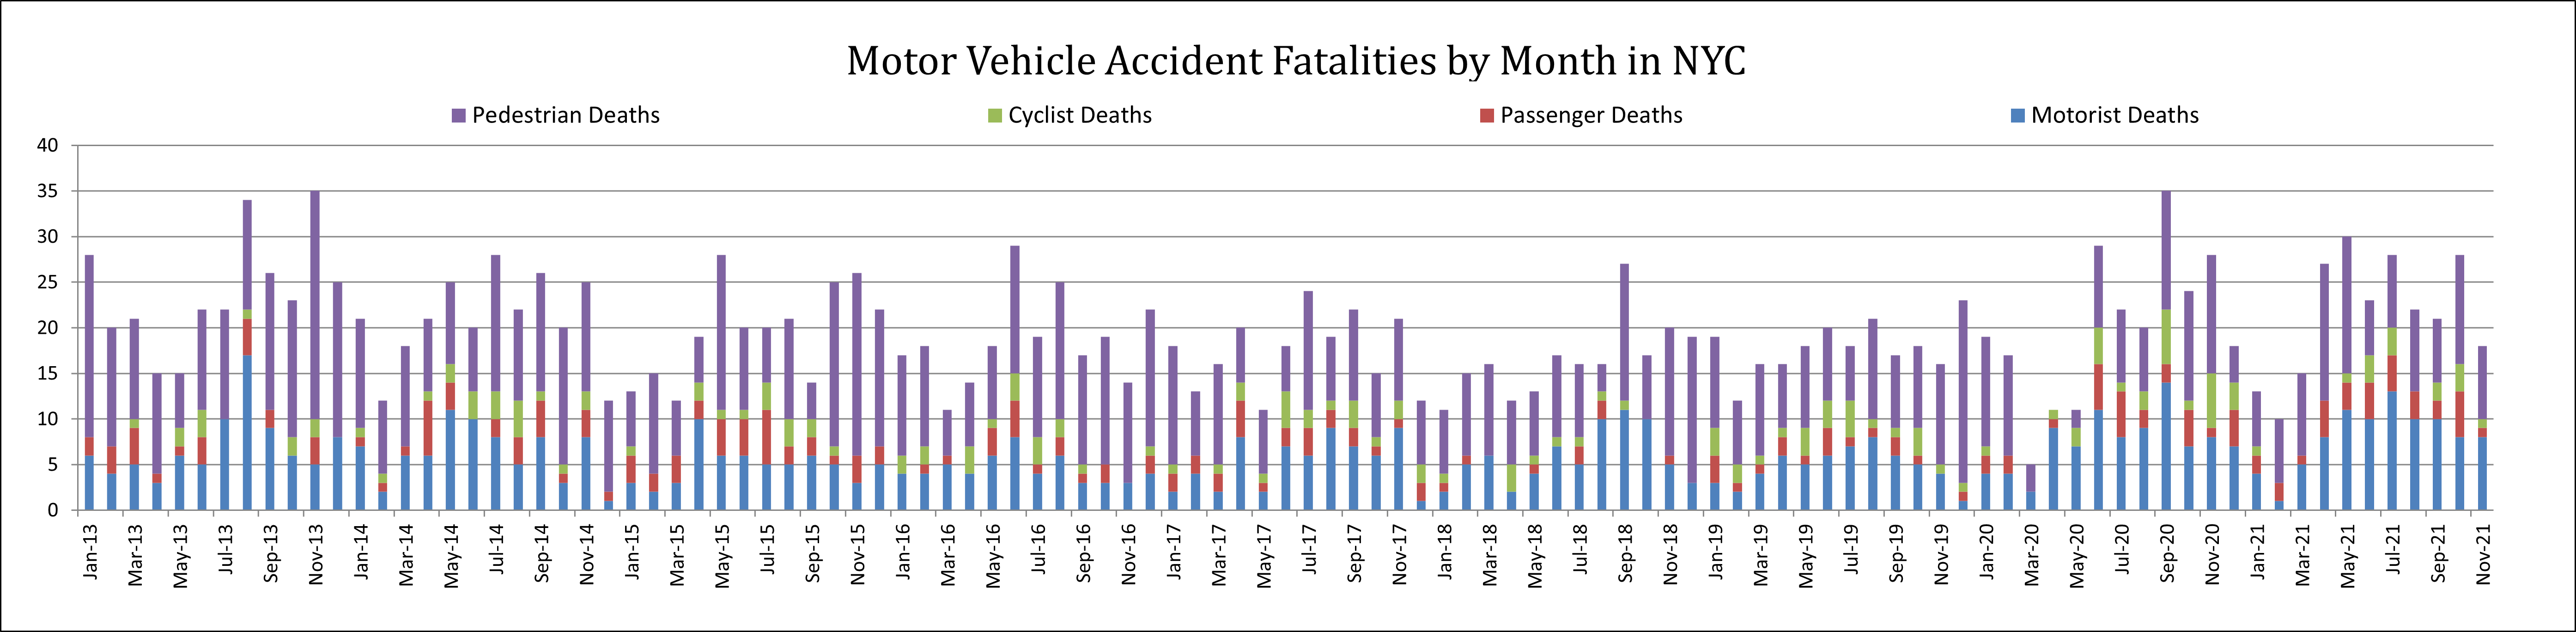 Motor vehicle accident fatalities NYC November 2021